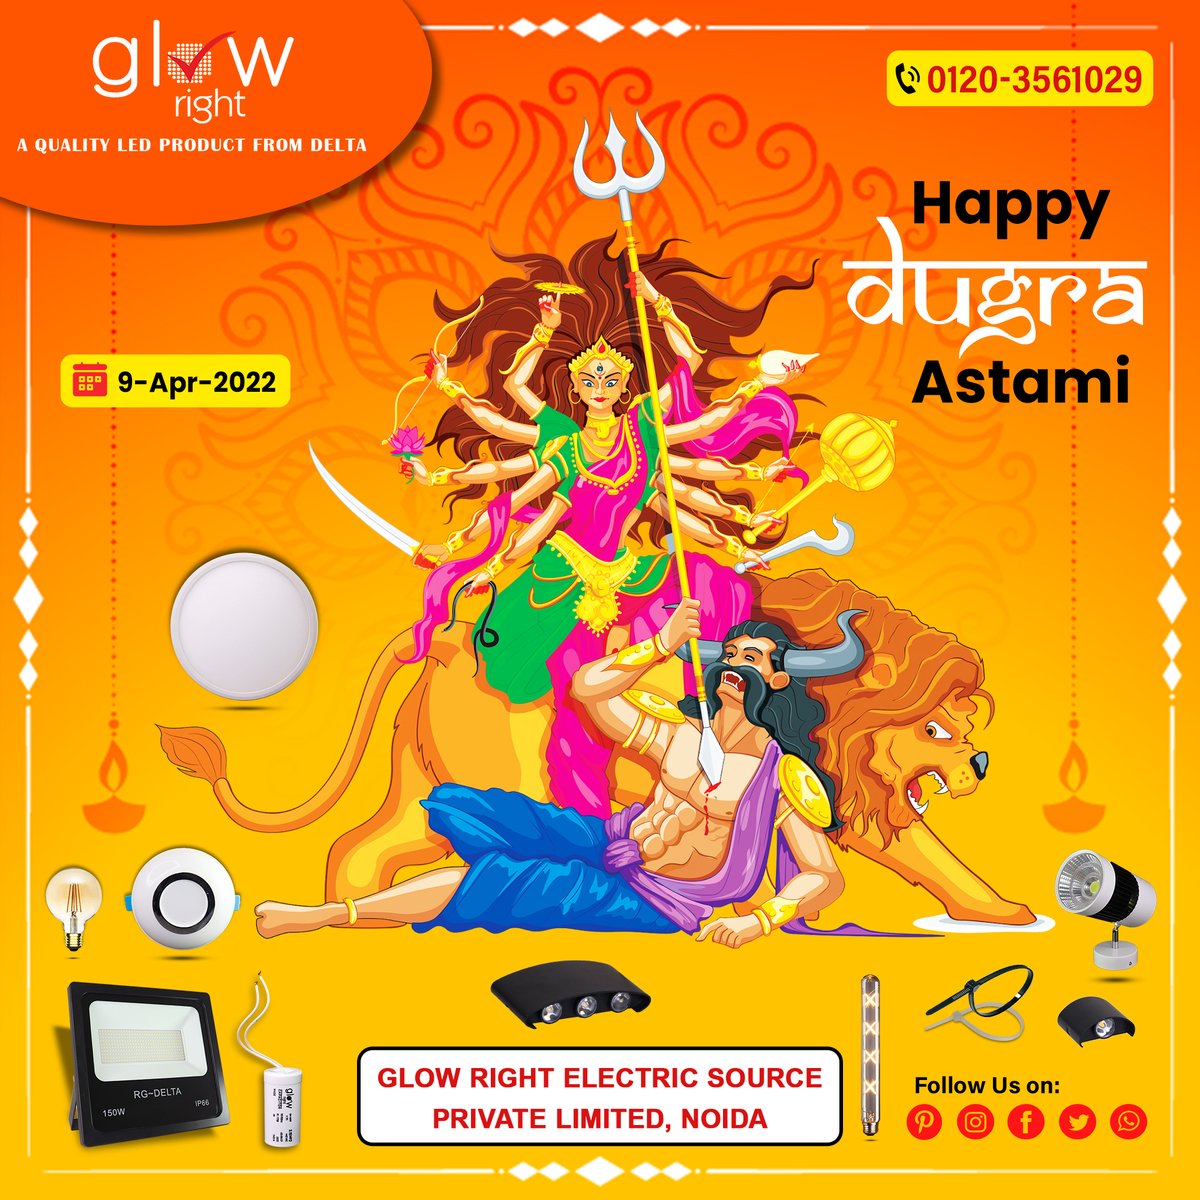 May Maa Durga always guide & bless all of us. May this Durga Ashtami brighten up your life with joy, wealth, and good health, wishing you a Happy Chaitra Durga Ashtami 2022
#ChaitraDurgaAshtami 
#GodBlessUs 
#Glowright